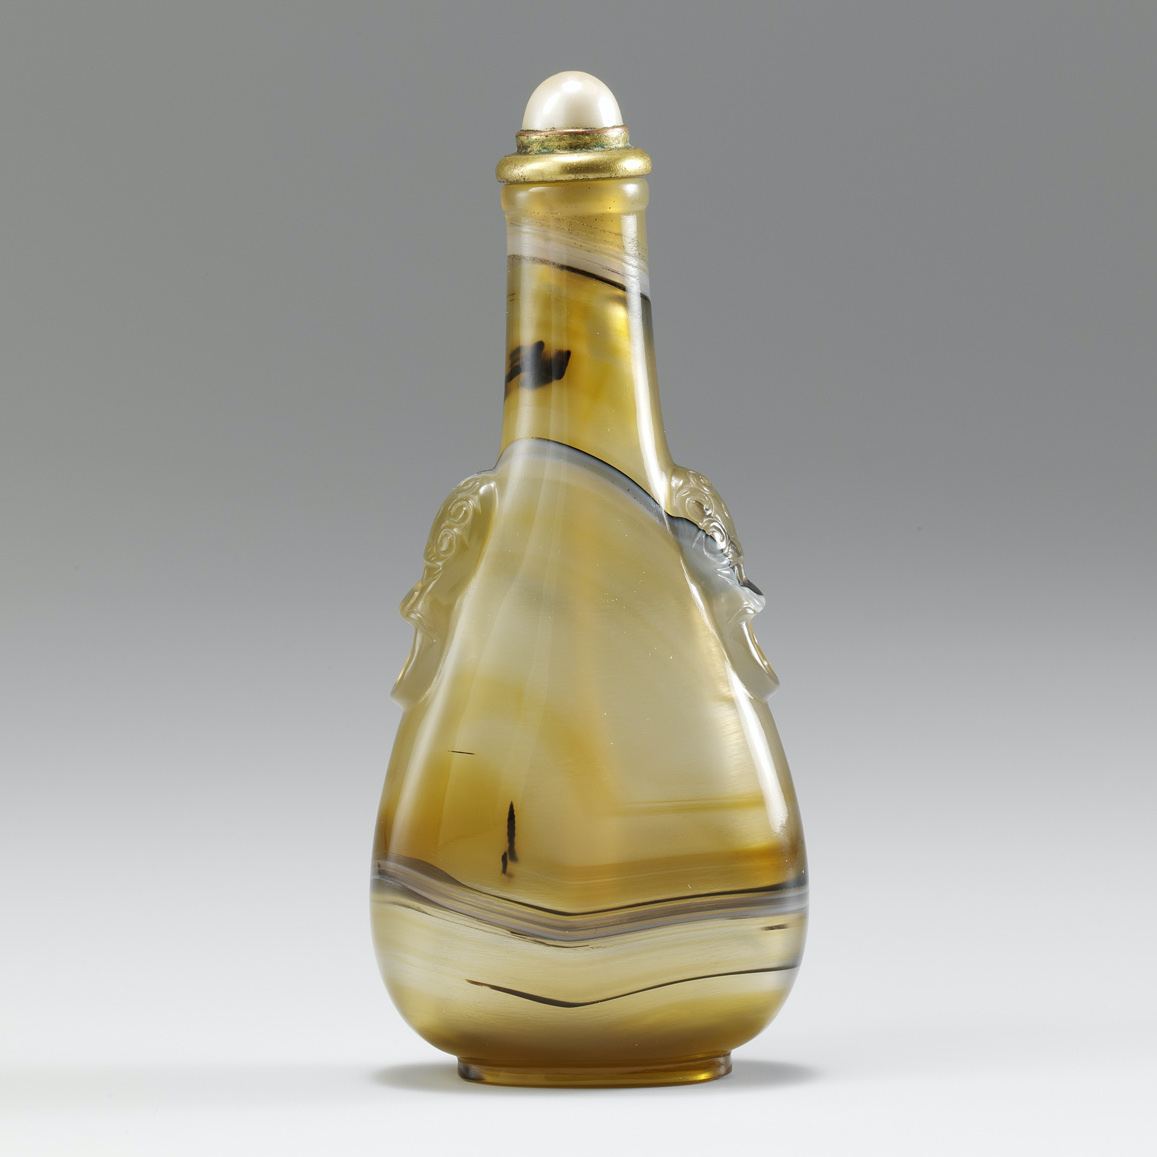 Agate of elongated pear form with unusual banding, 1730-1800